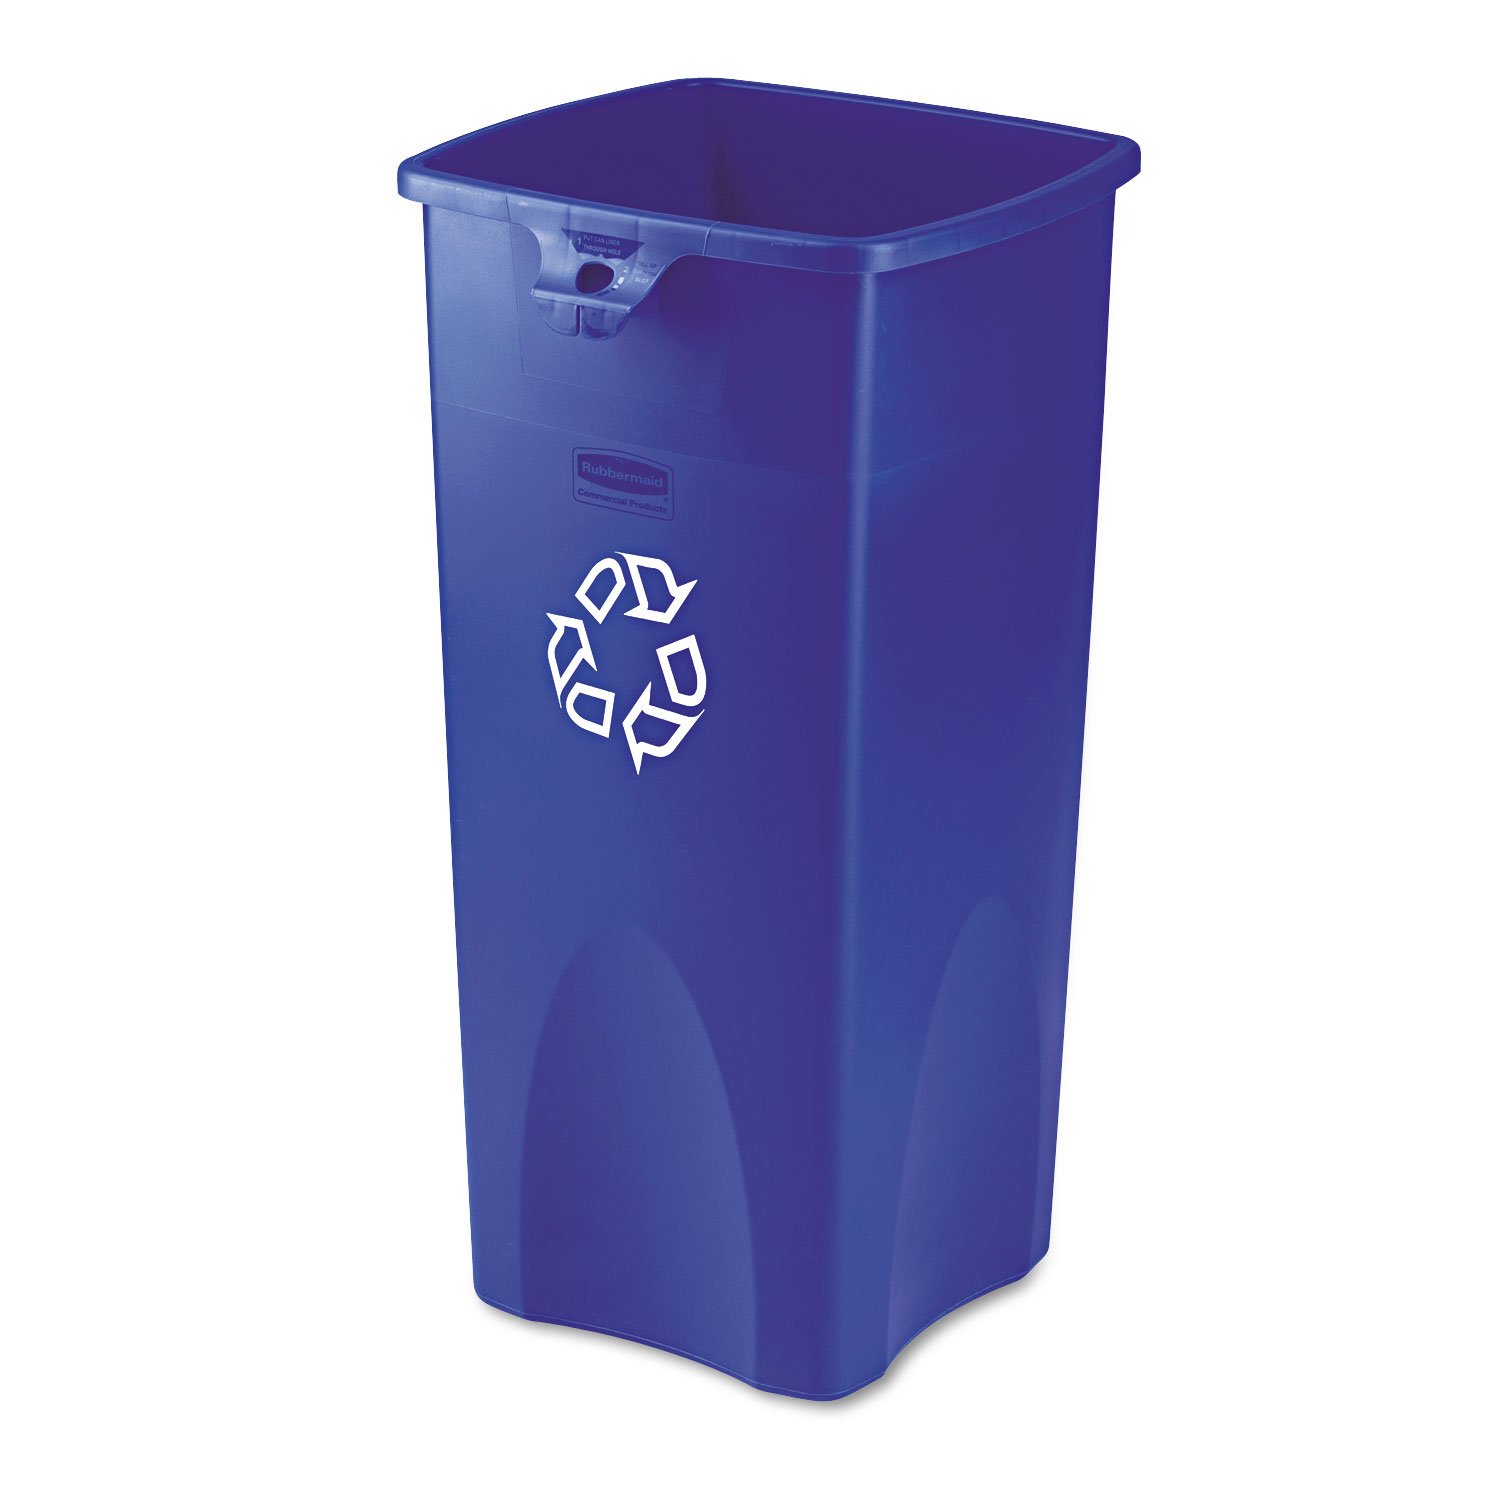 Recycled Untouchable Square Recycling Container, Plastic, 23 gal, Blue